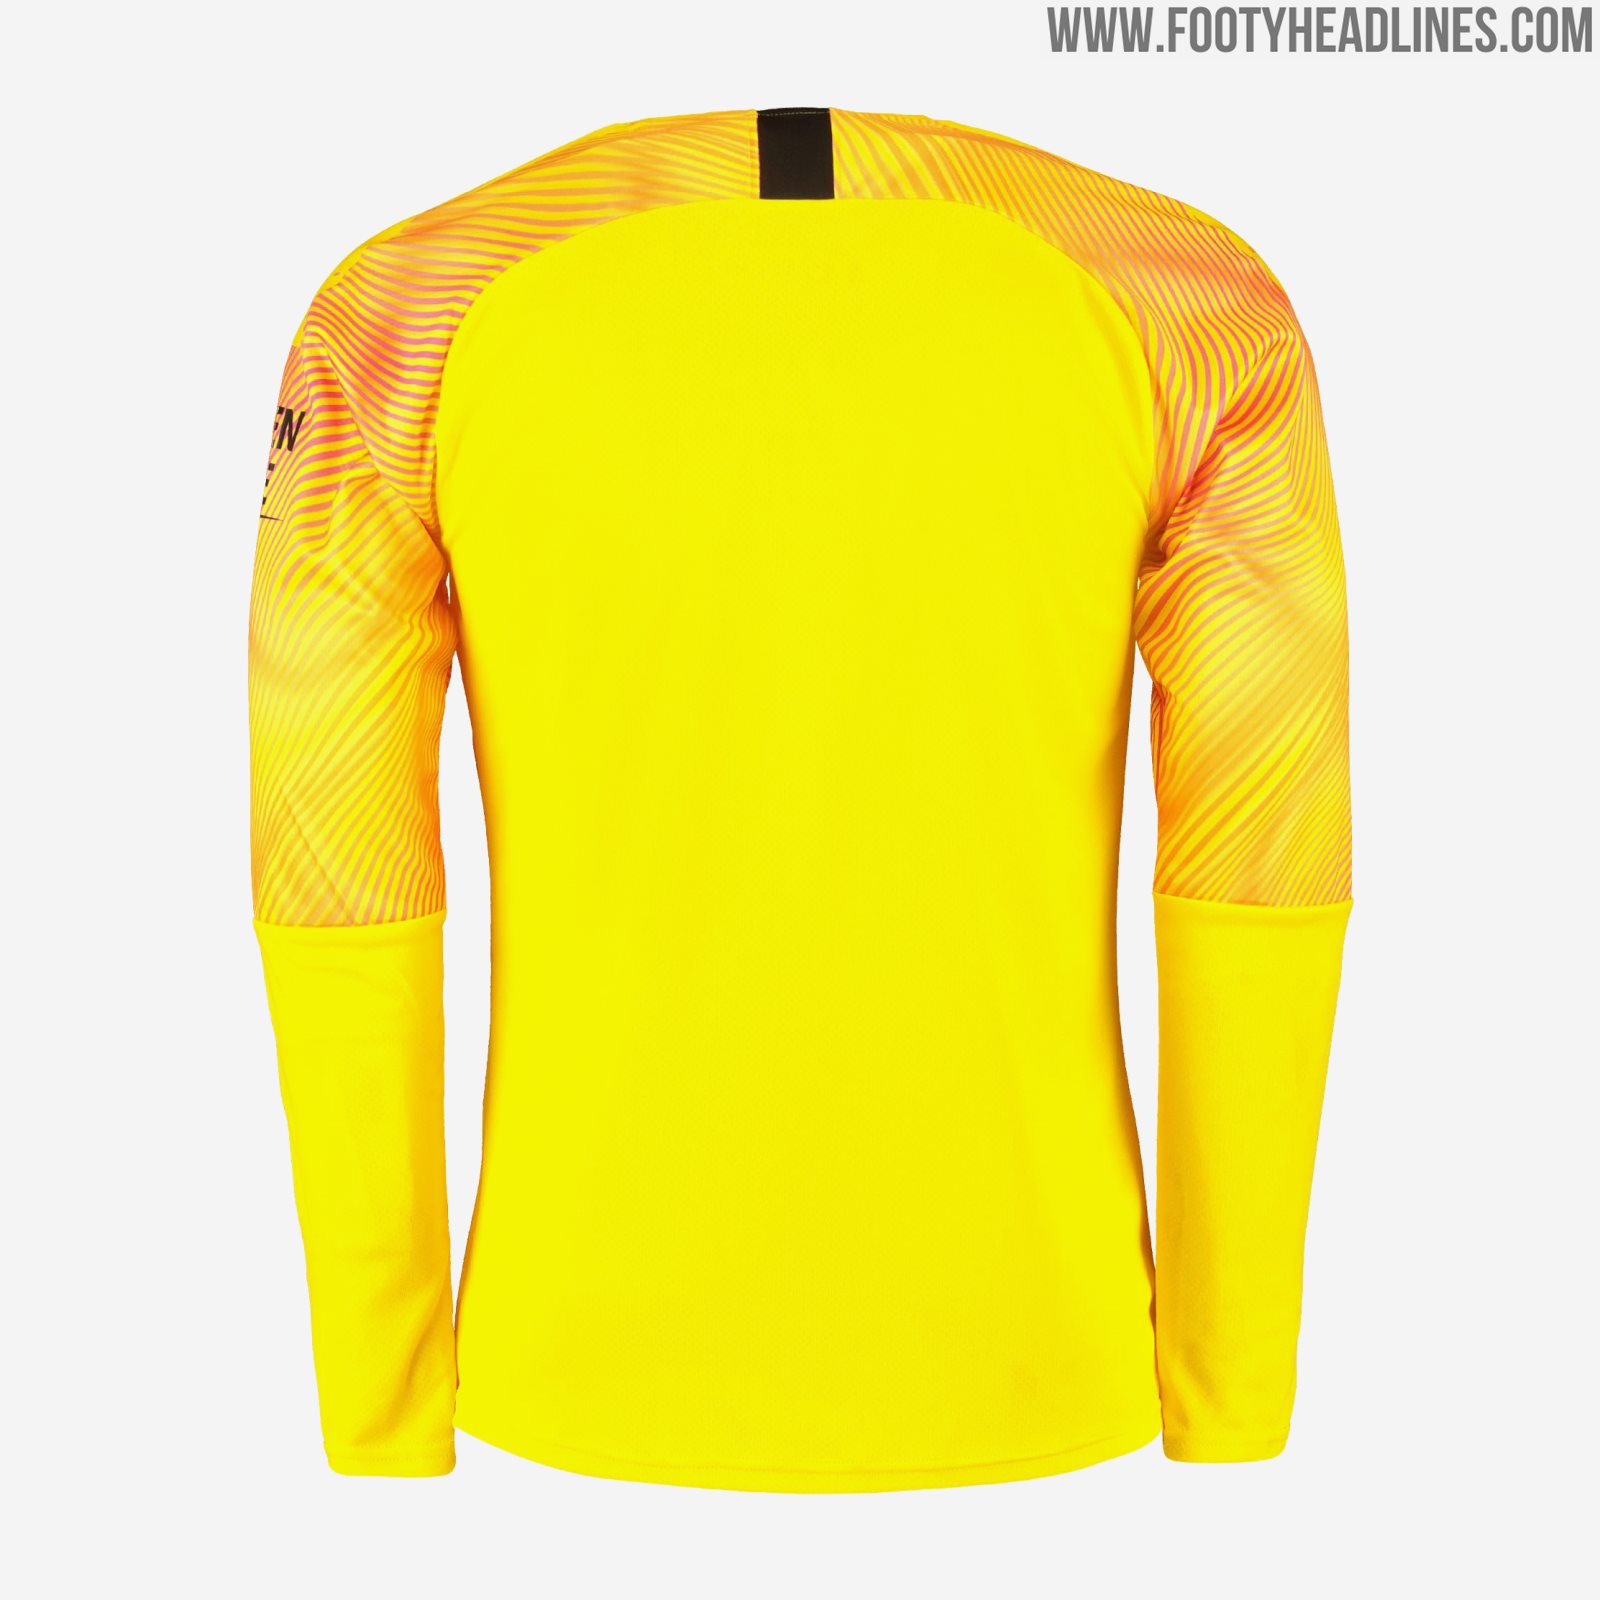 Manchester City 19-20 Goalkeeper Home, Away & Third Kits Released ...